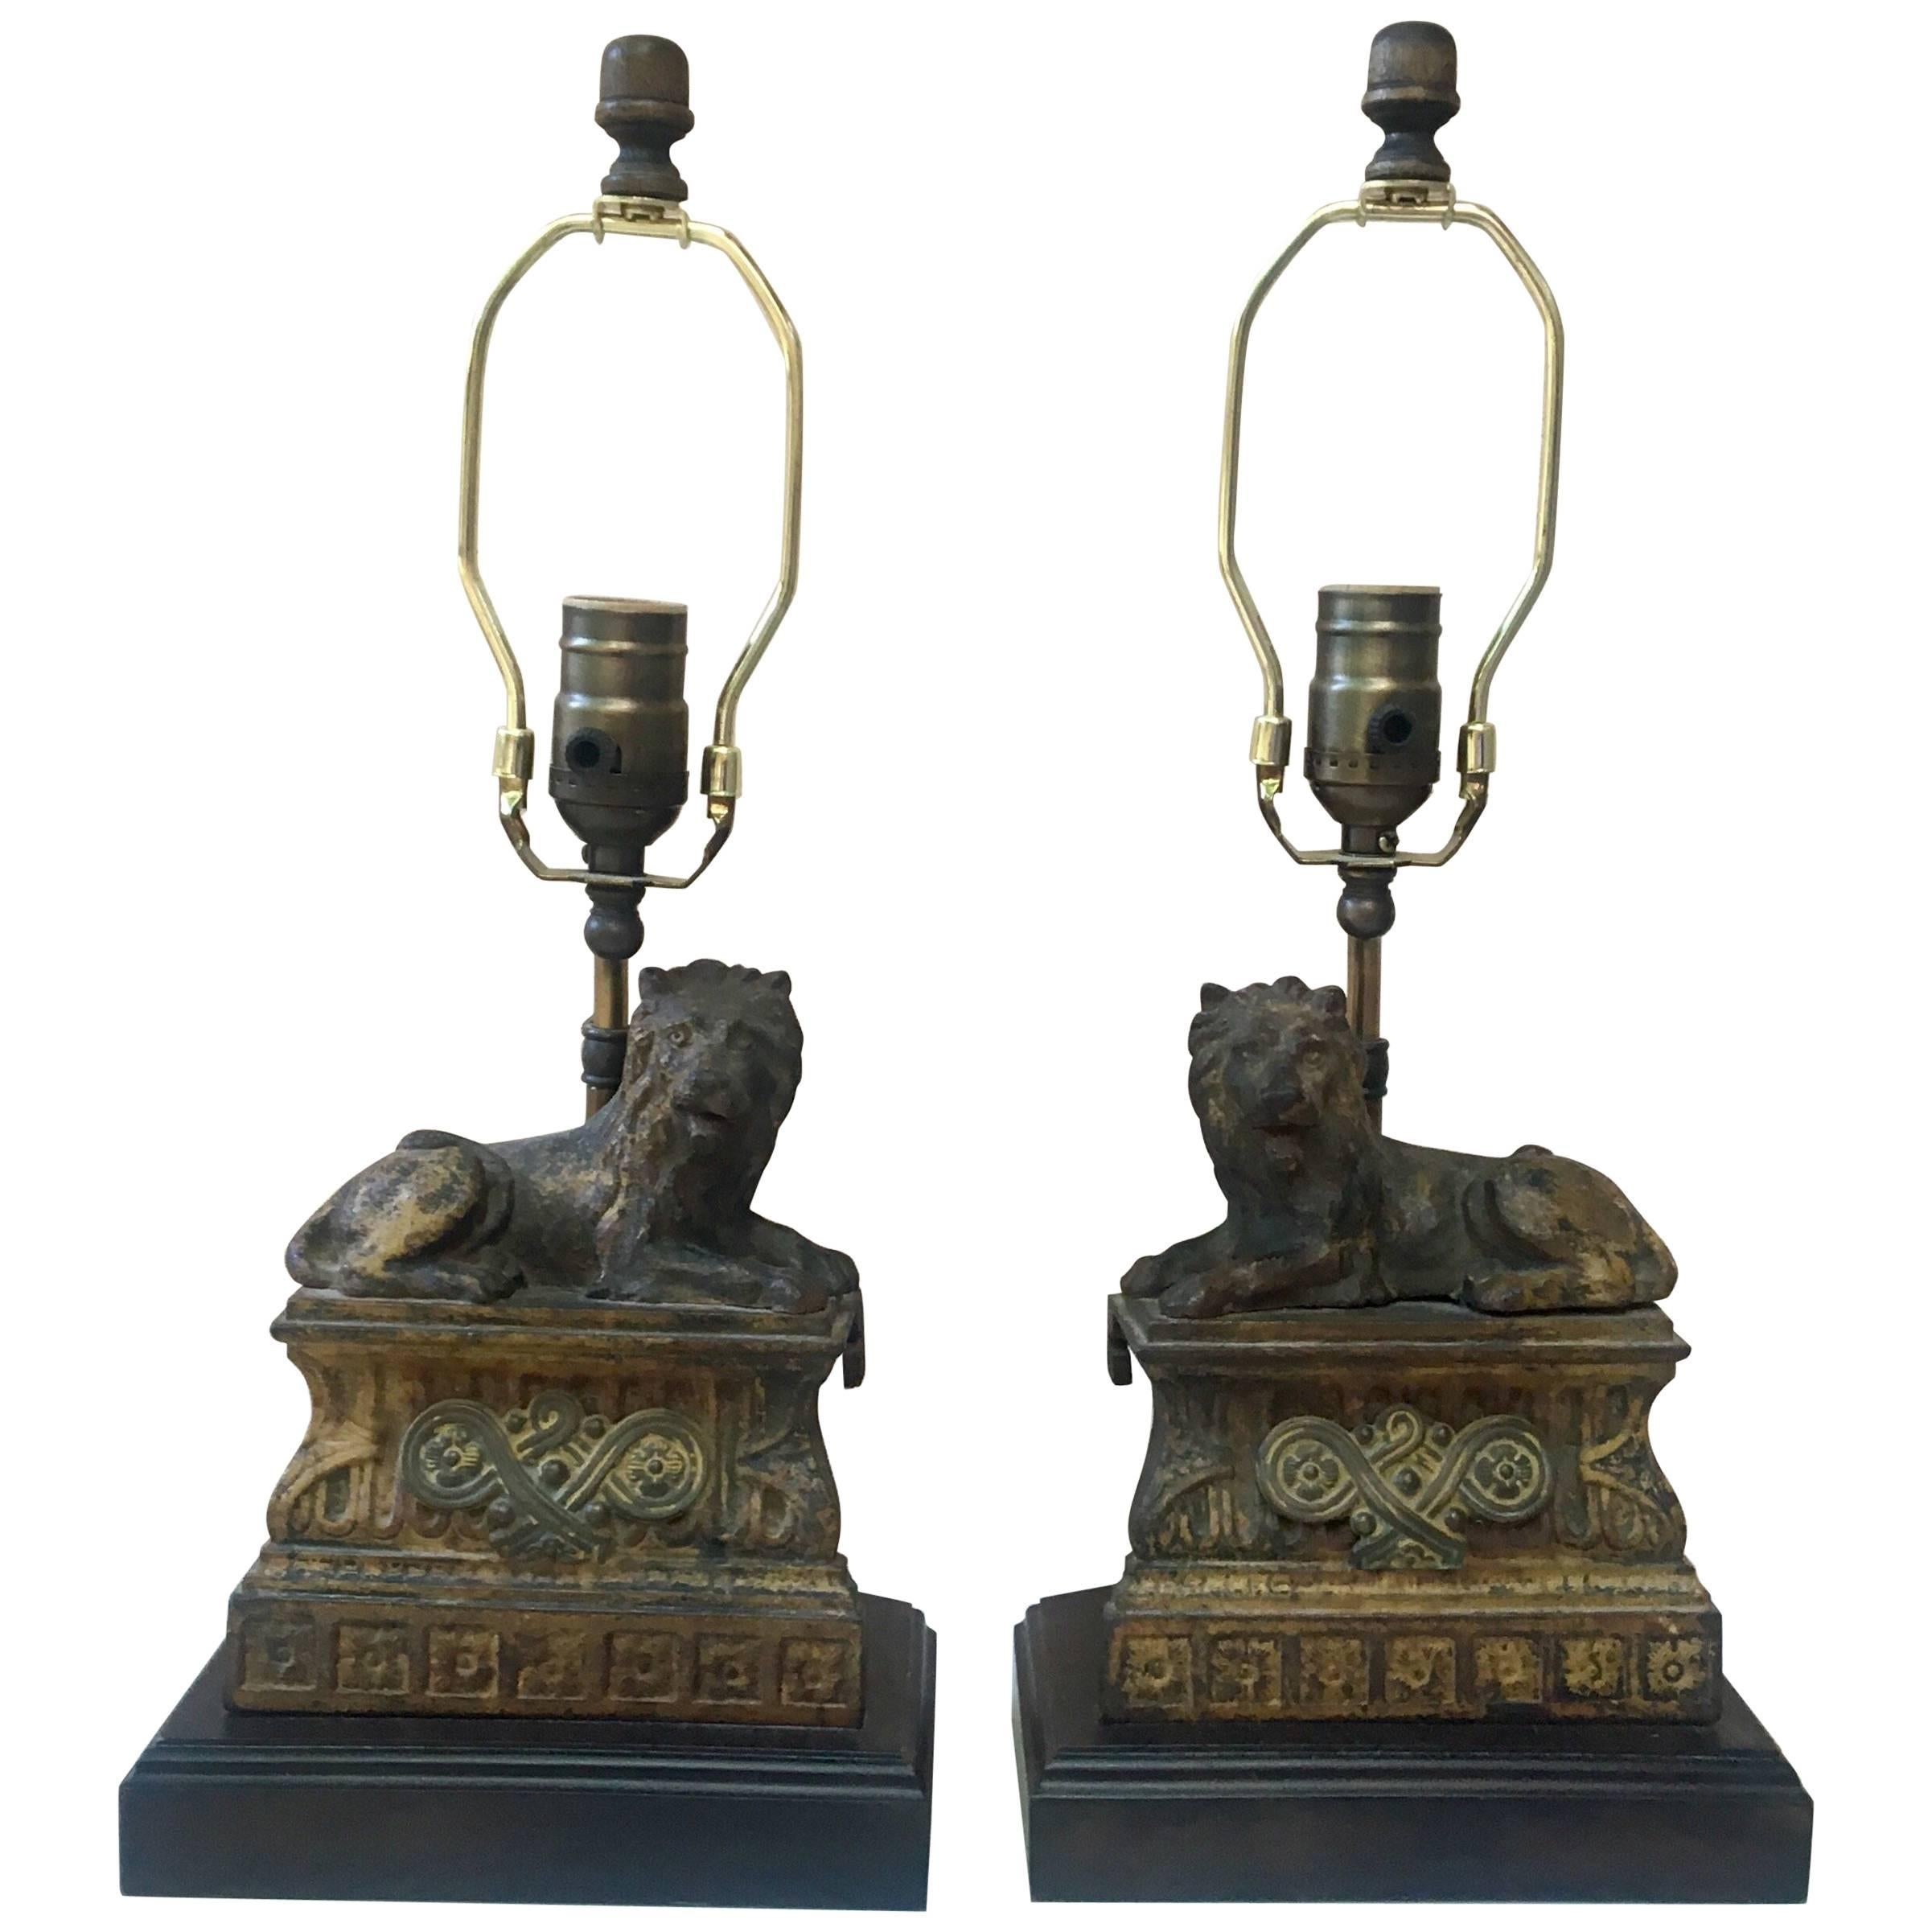 Pair of Cast Iron Lions Lamps, circa 1880